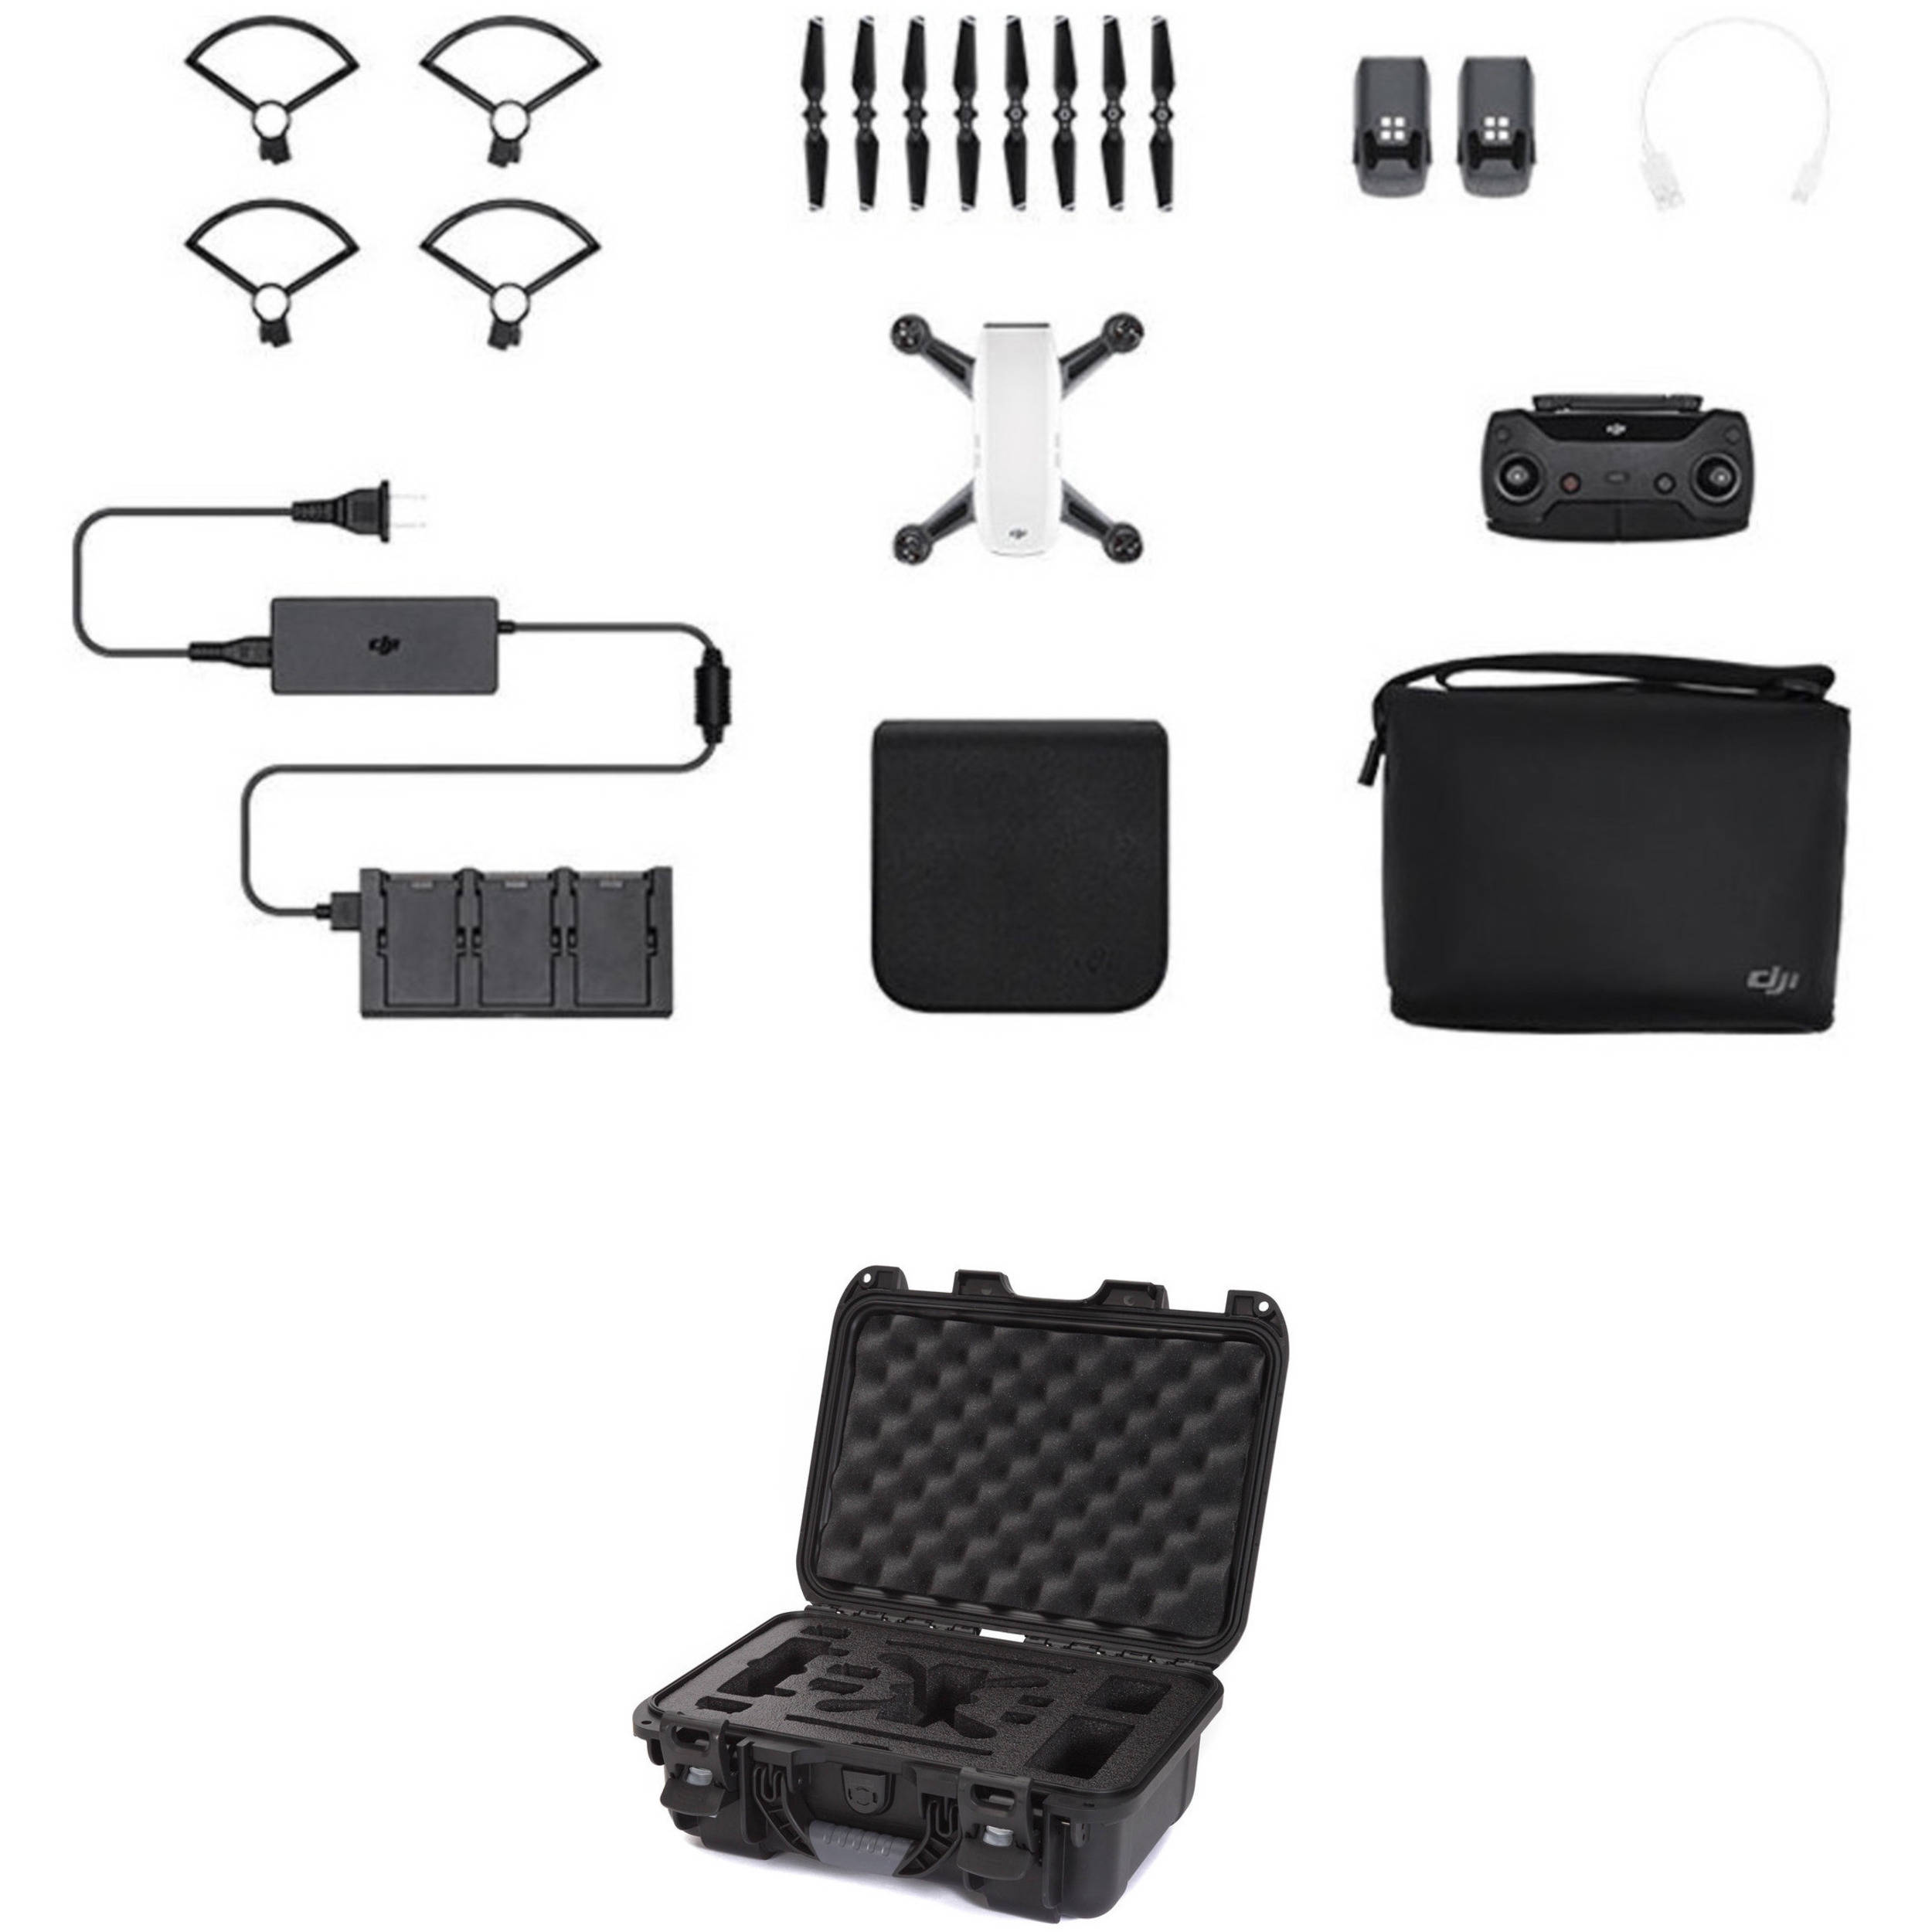 dji spark fly more combo deals